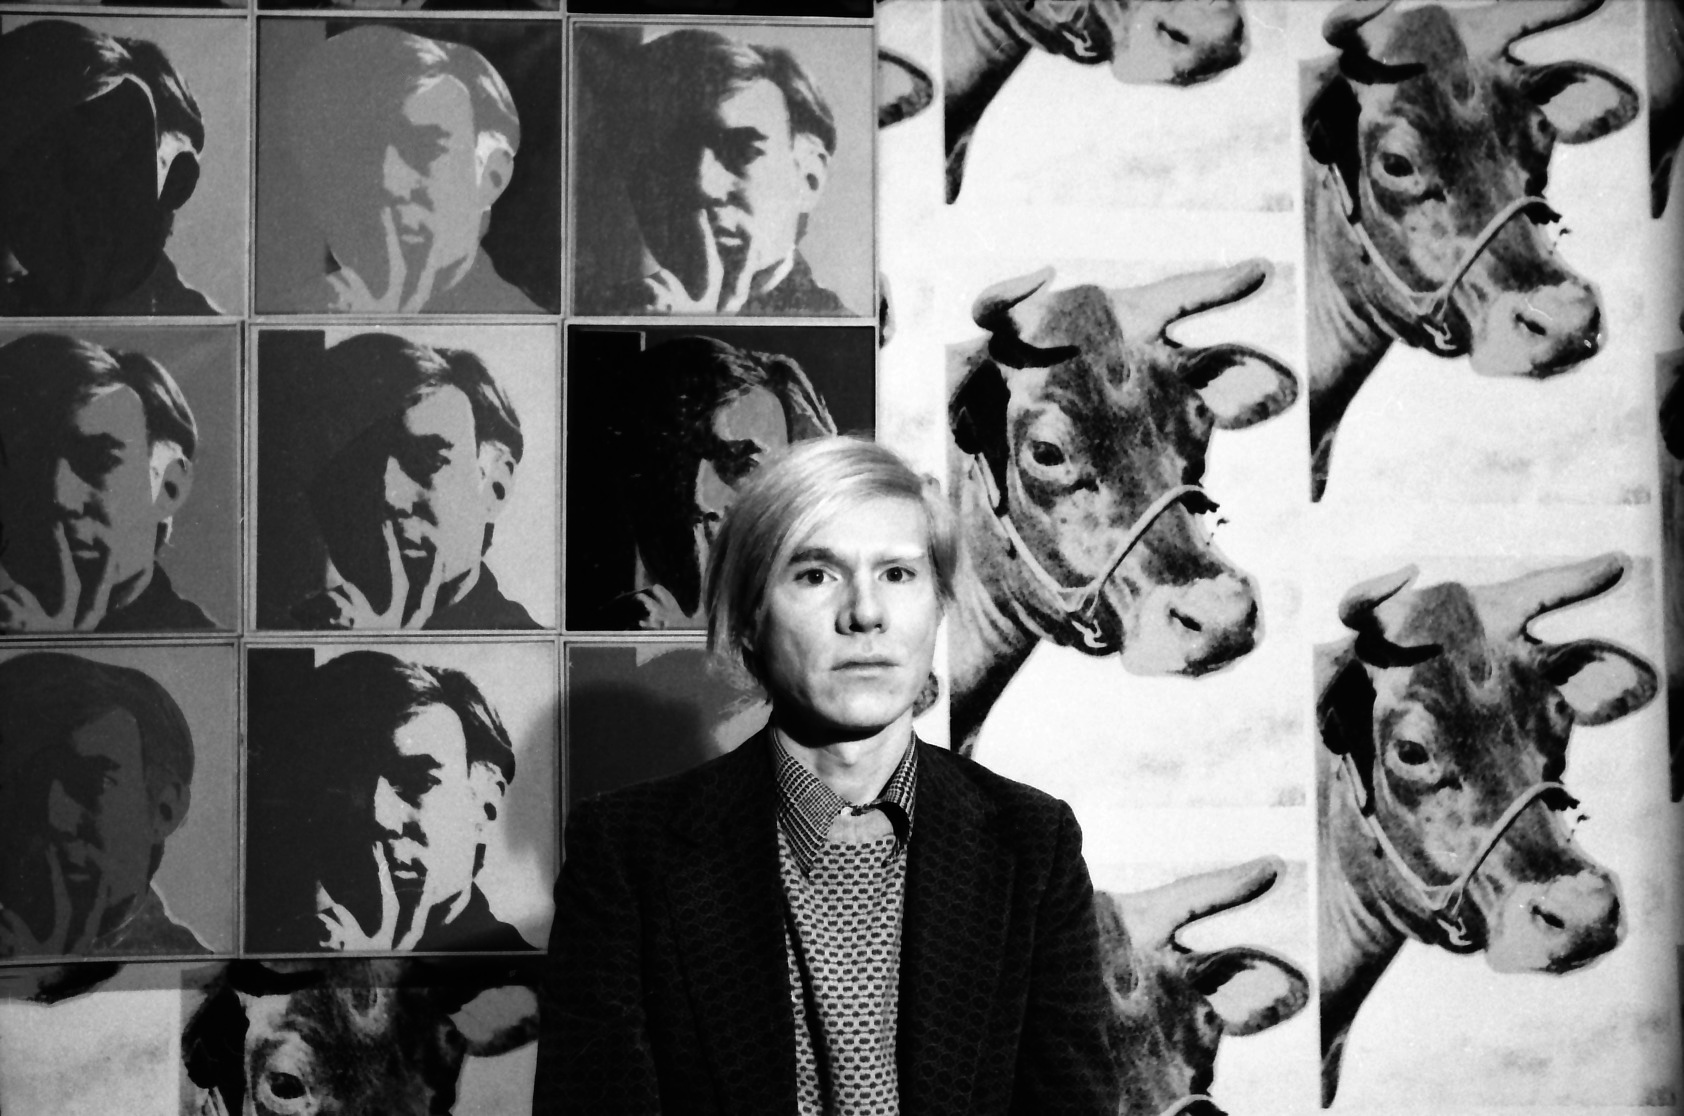 PHOTO: Andy Warhol at his May 1971 retrospective at the Whitney Museum of American Art in New York.